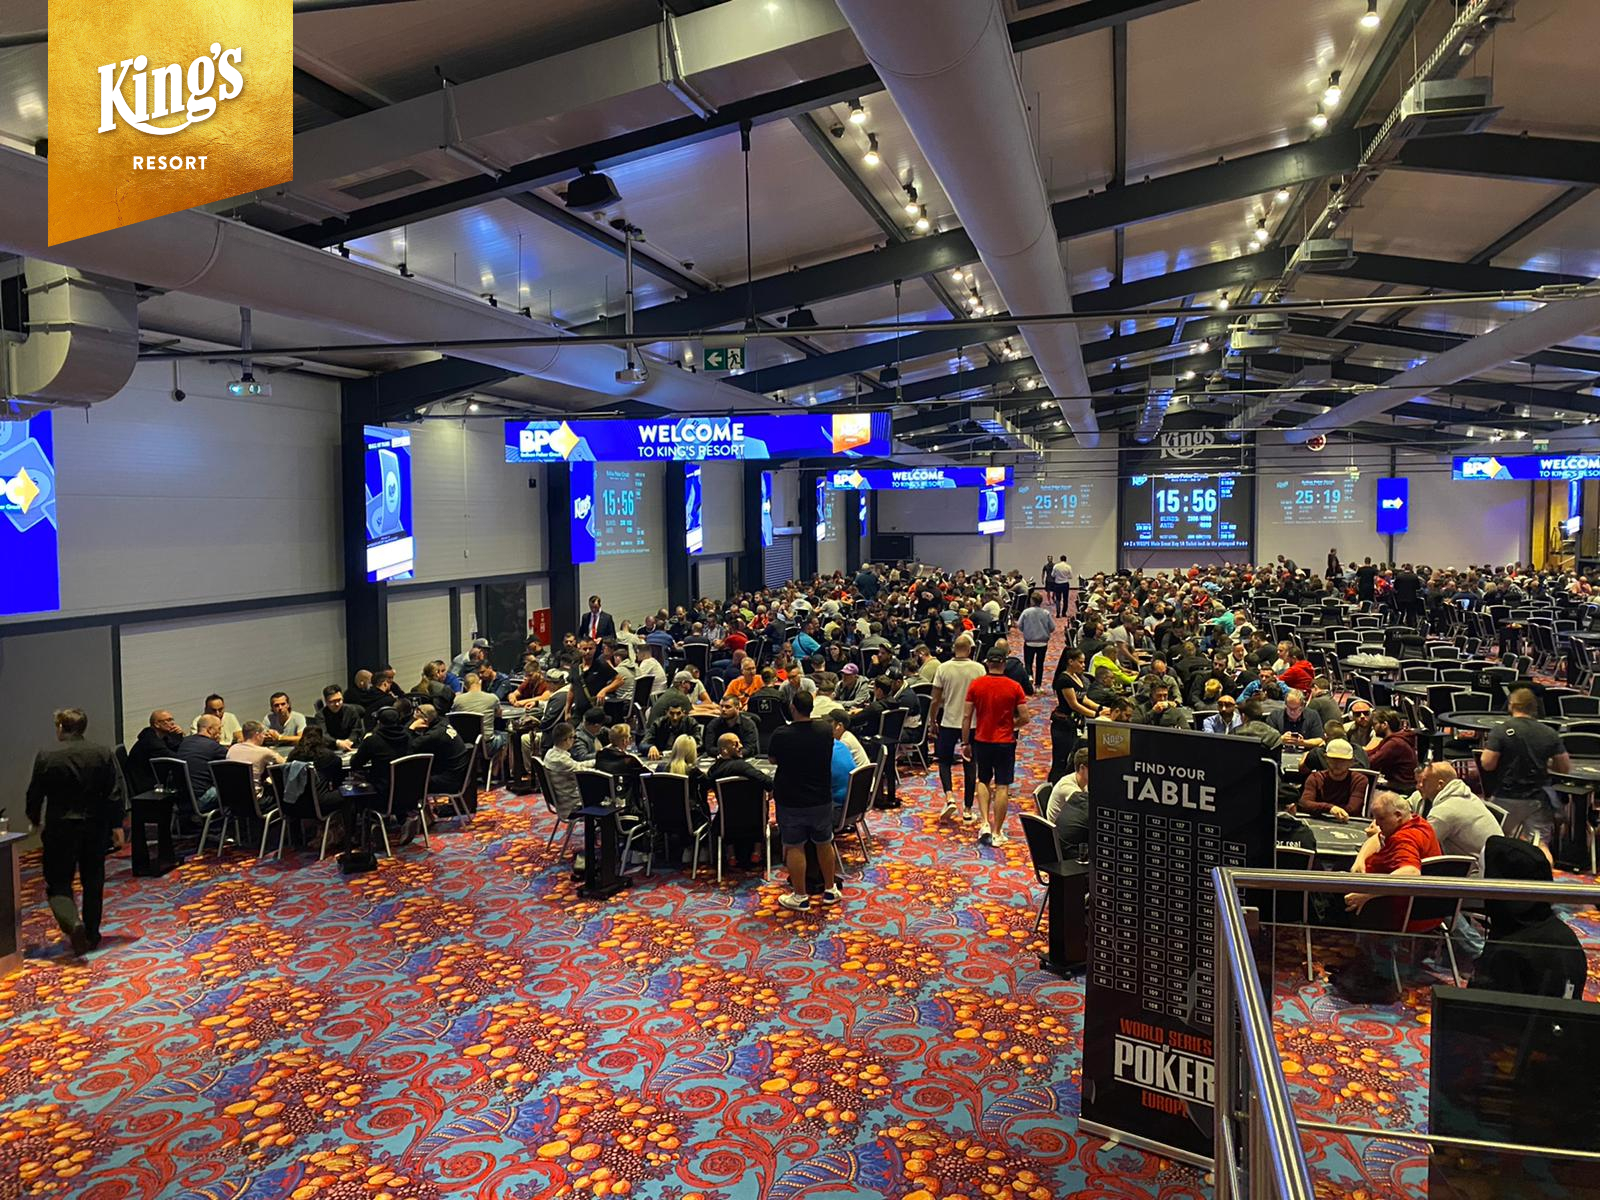 Chips Fly as Mass Brawl Erupts Inside King’s Casino Rozvadov (VIDEO)